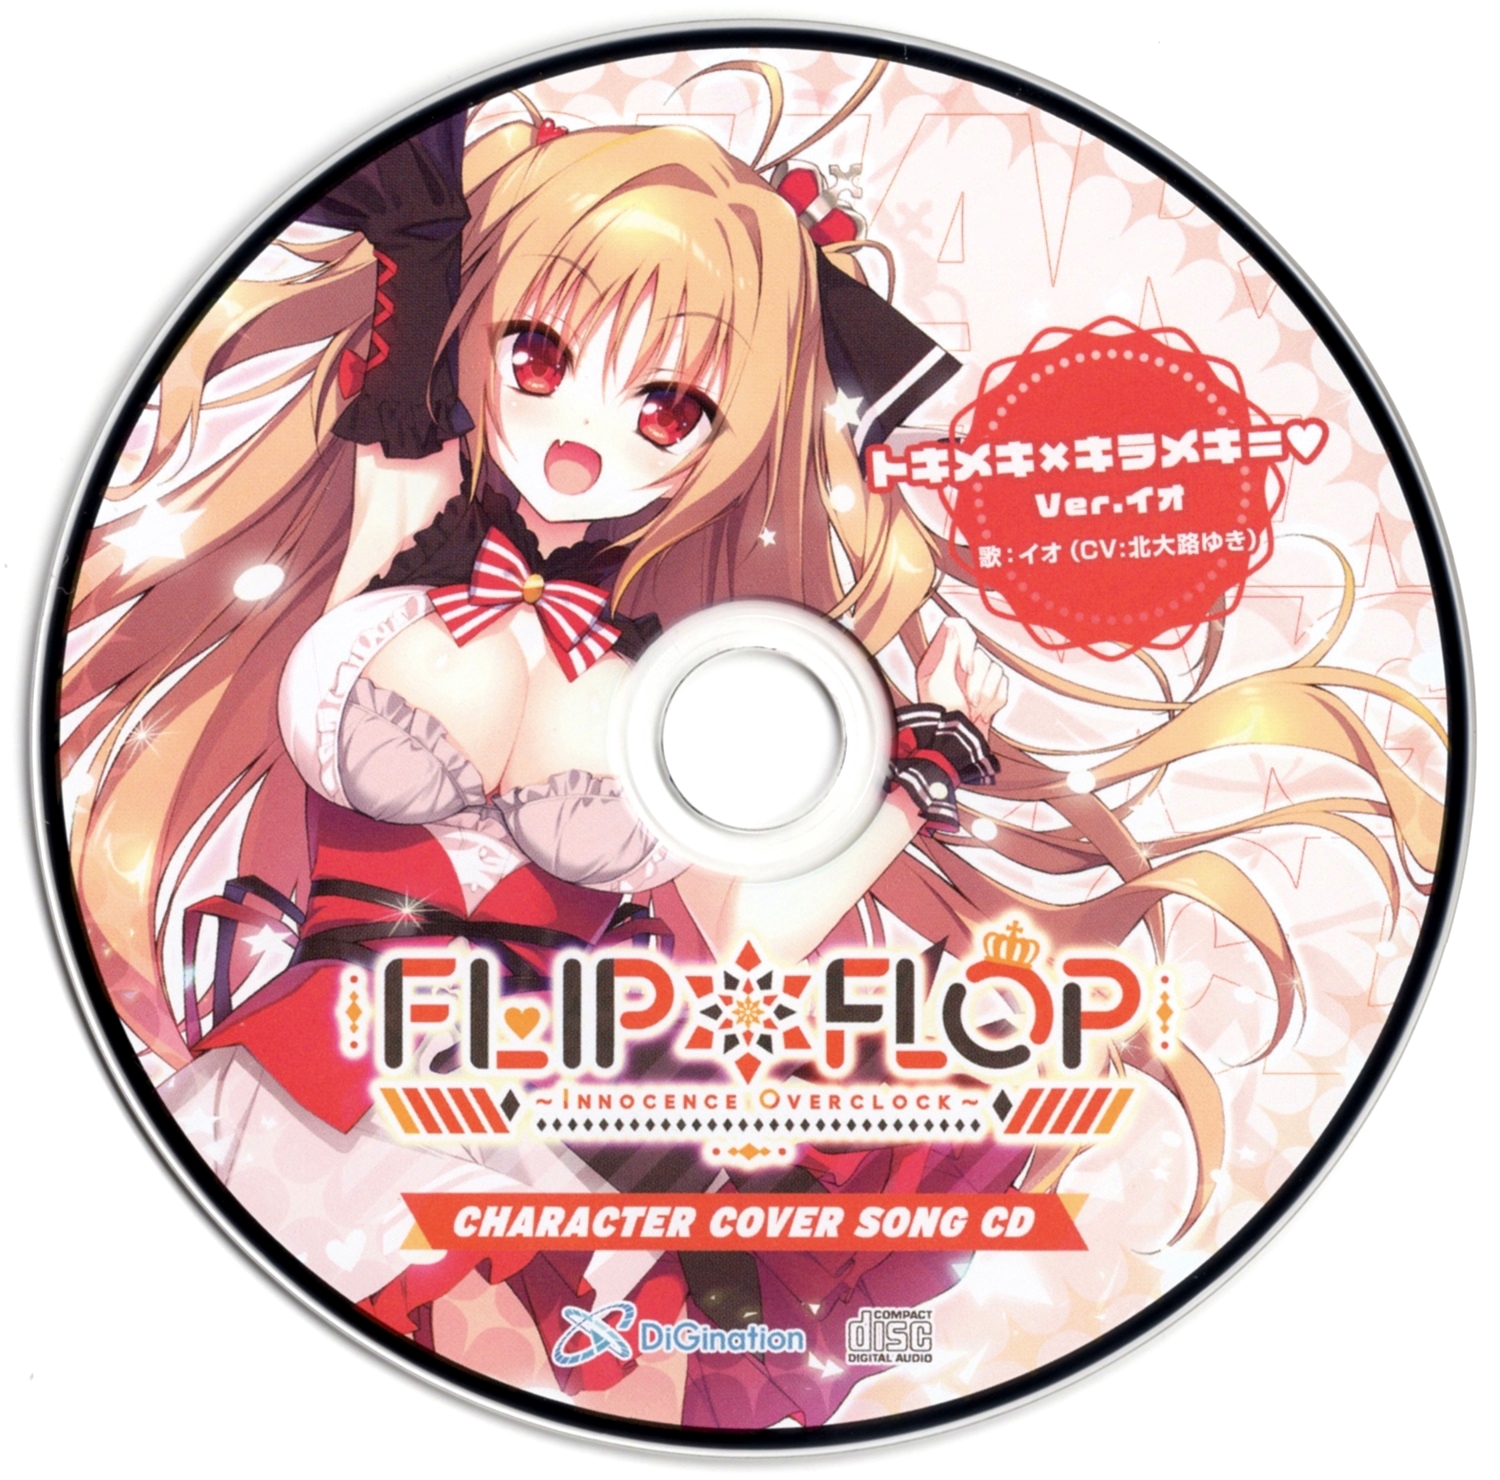 【WAV】ゲーム「FLIP＊FLOP 〜INNOCENCE OVERCLOCK〜」Character Cover Song & Asmr Voice／DiGination